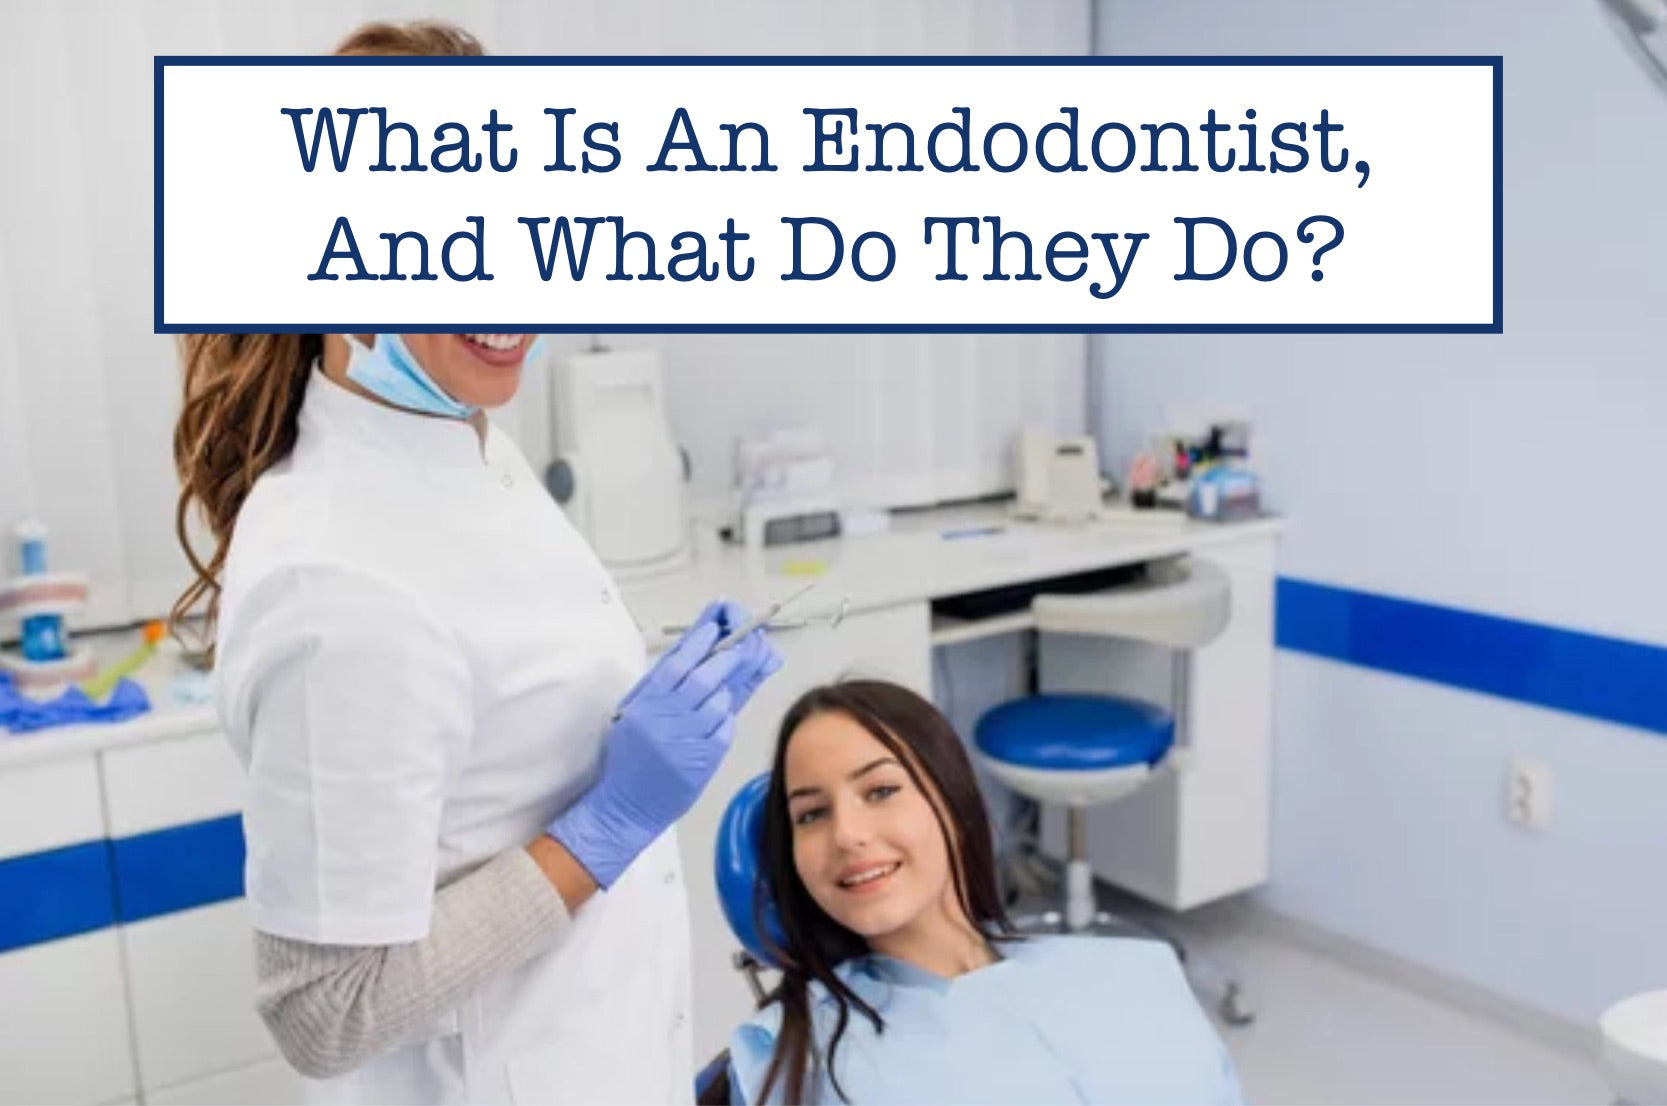 What Is An Endodontist, And What Do They Do?